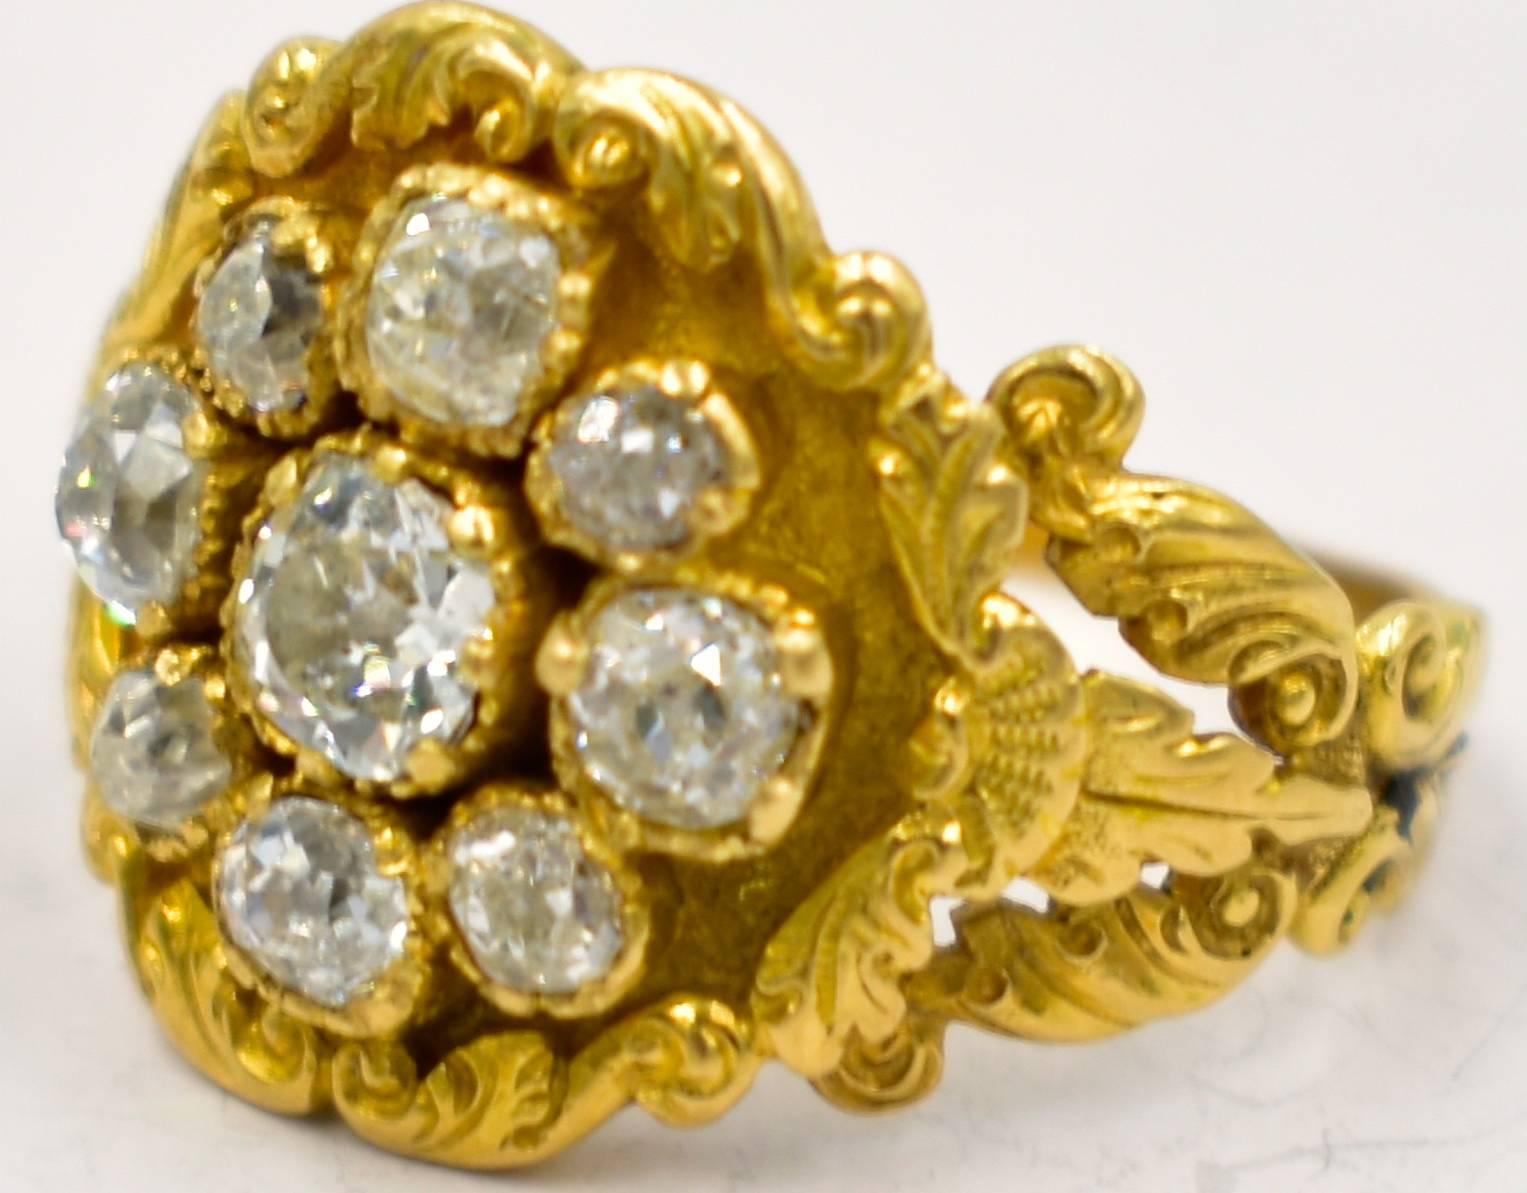 Fantastic Georgian diamond cluster ring in an elaborate 18K gold setting of leaves and shells. A truly spectacular ring, it is a size 5 3/4 and can be resized larger. An unusual, beautiful and very special ring.